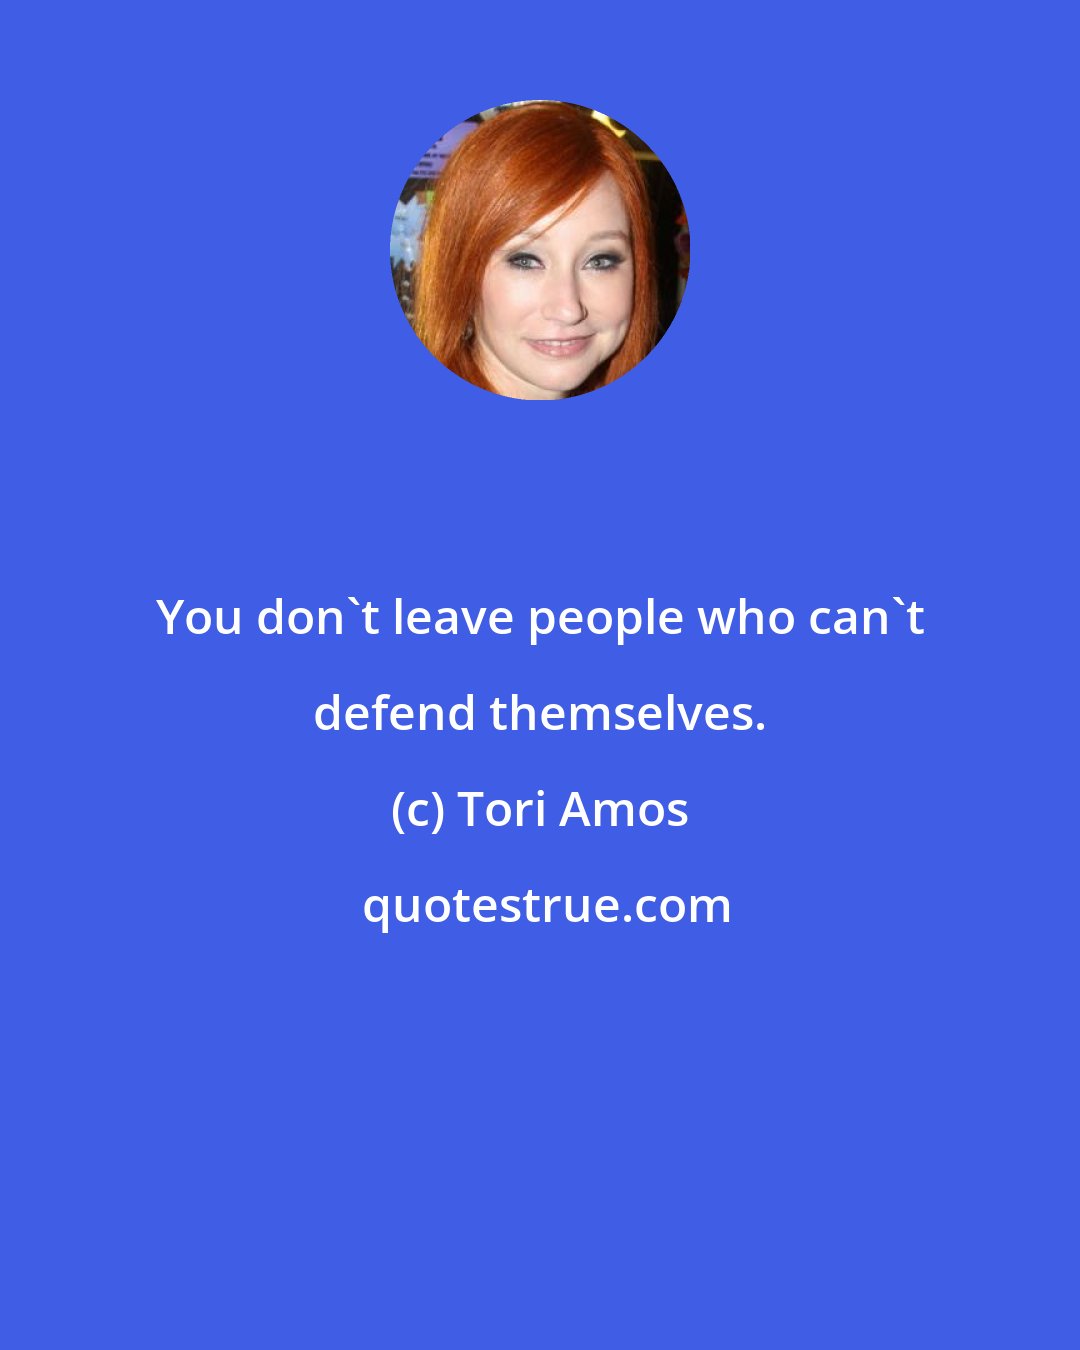 Tori Amos: You don't leave people who can't defend themselves.